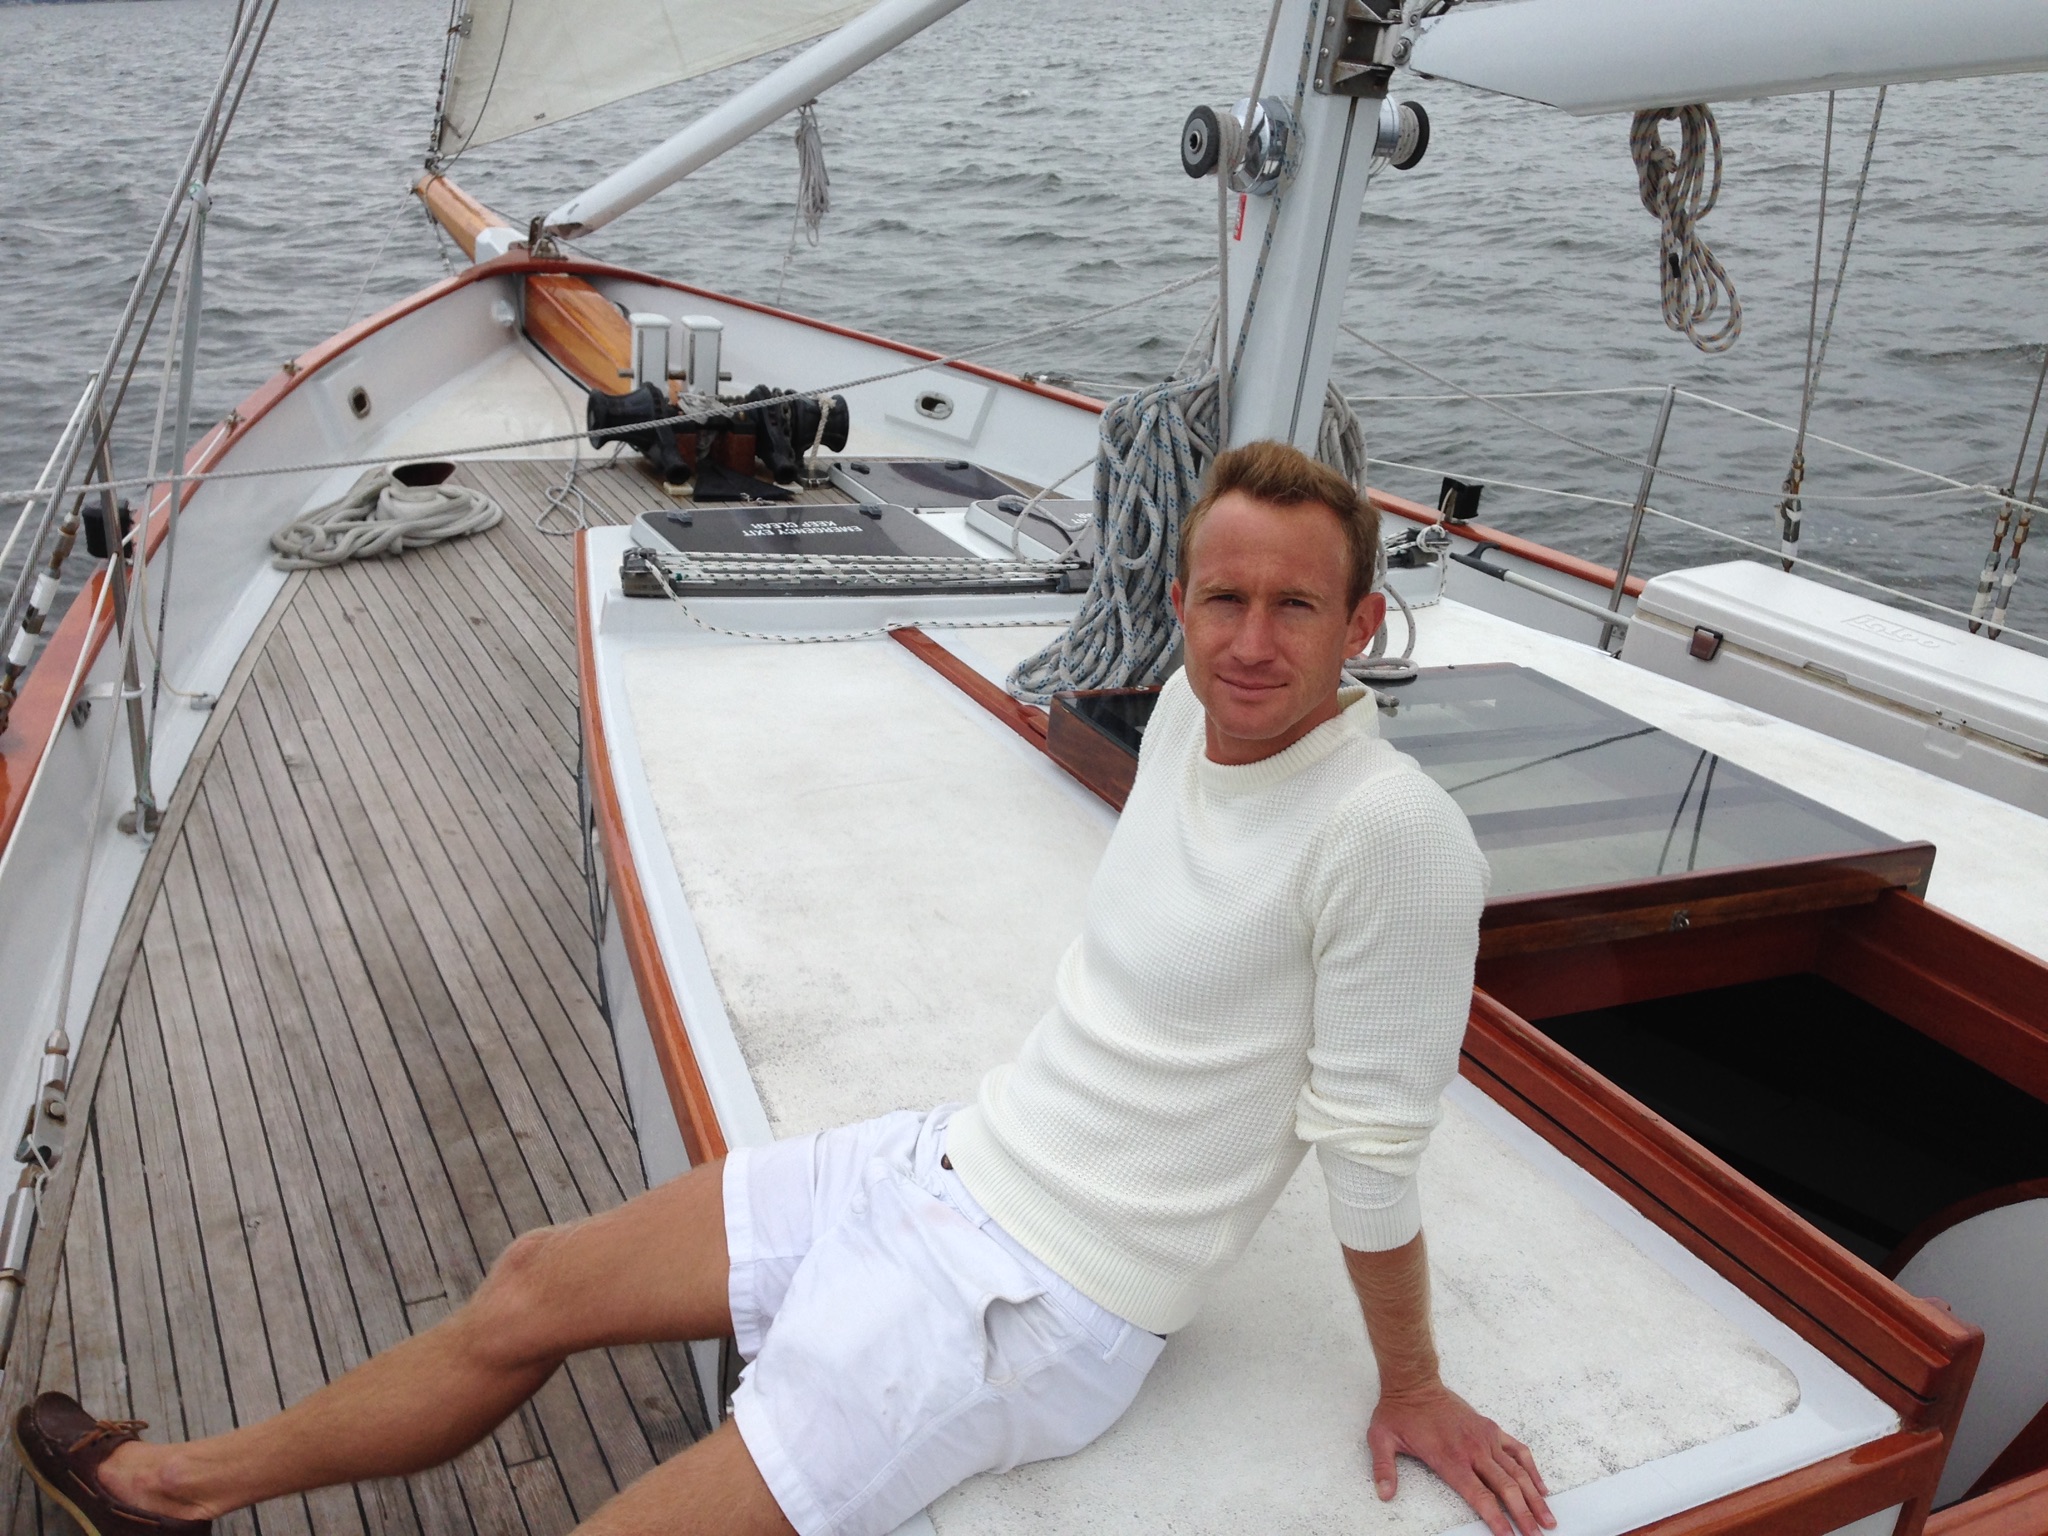 Man in white shorts and sweater leaning back and relaxing on sail